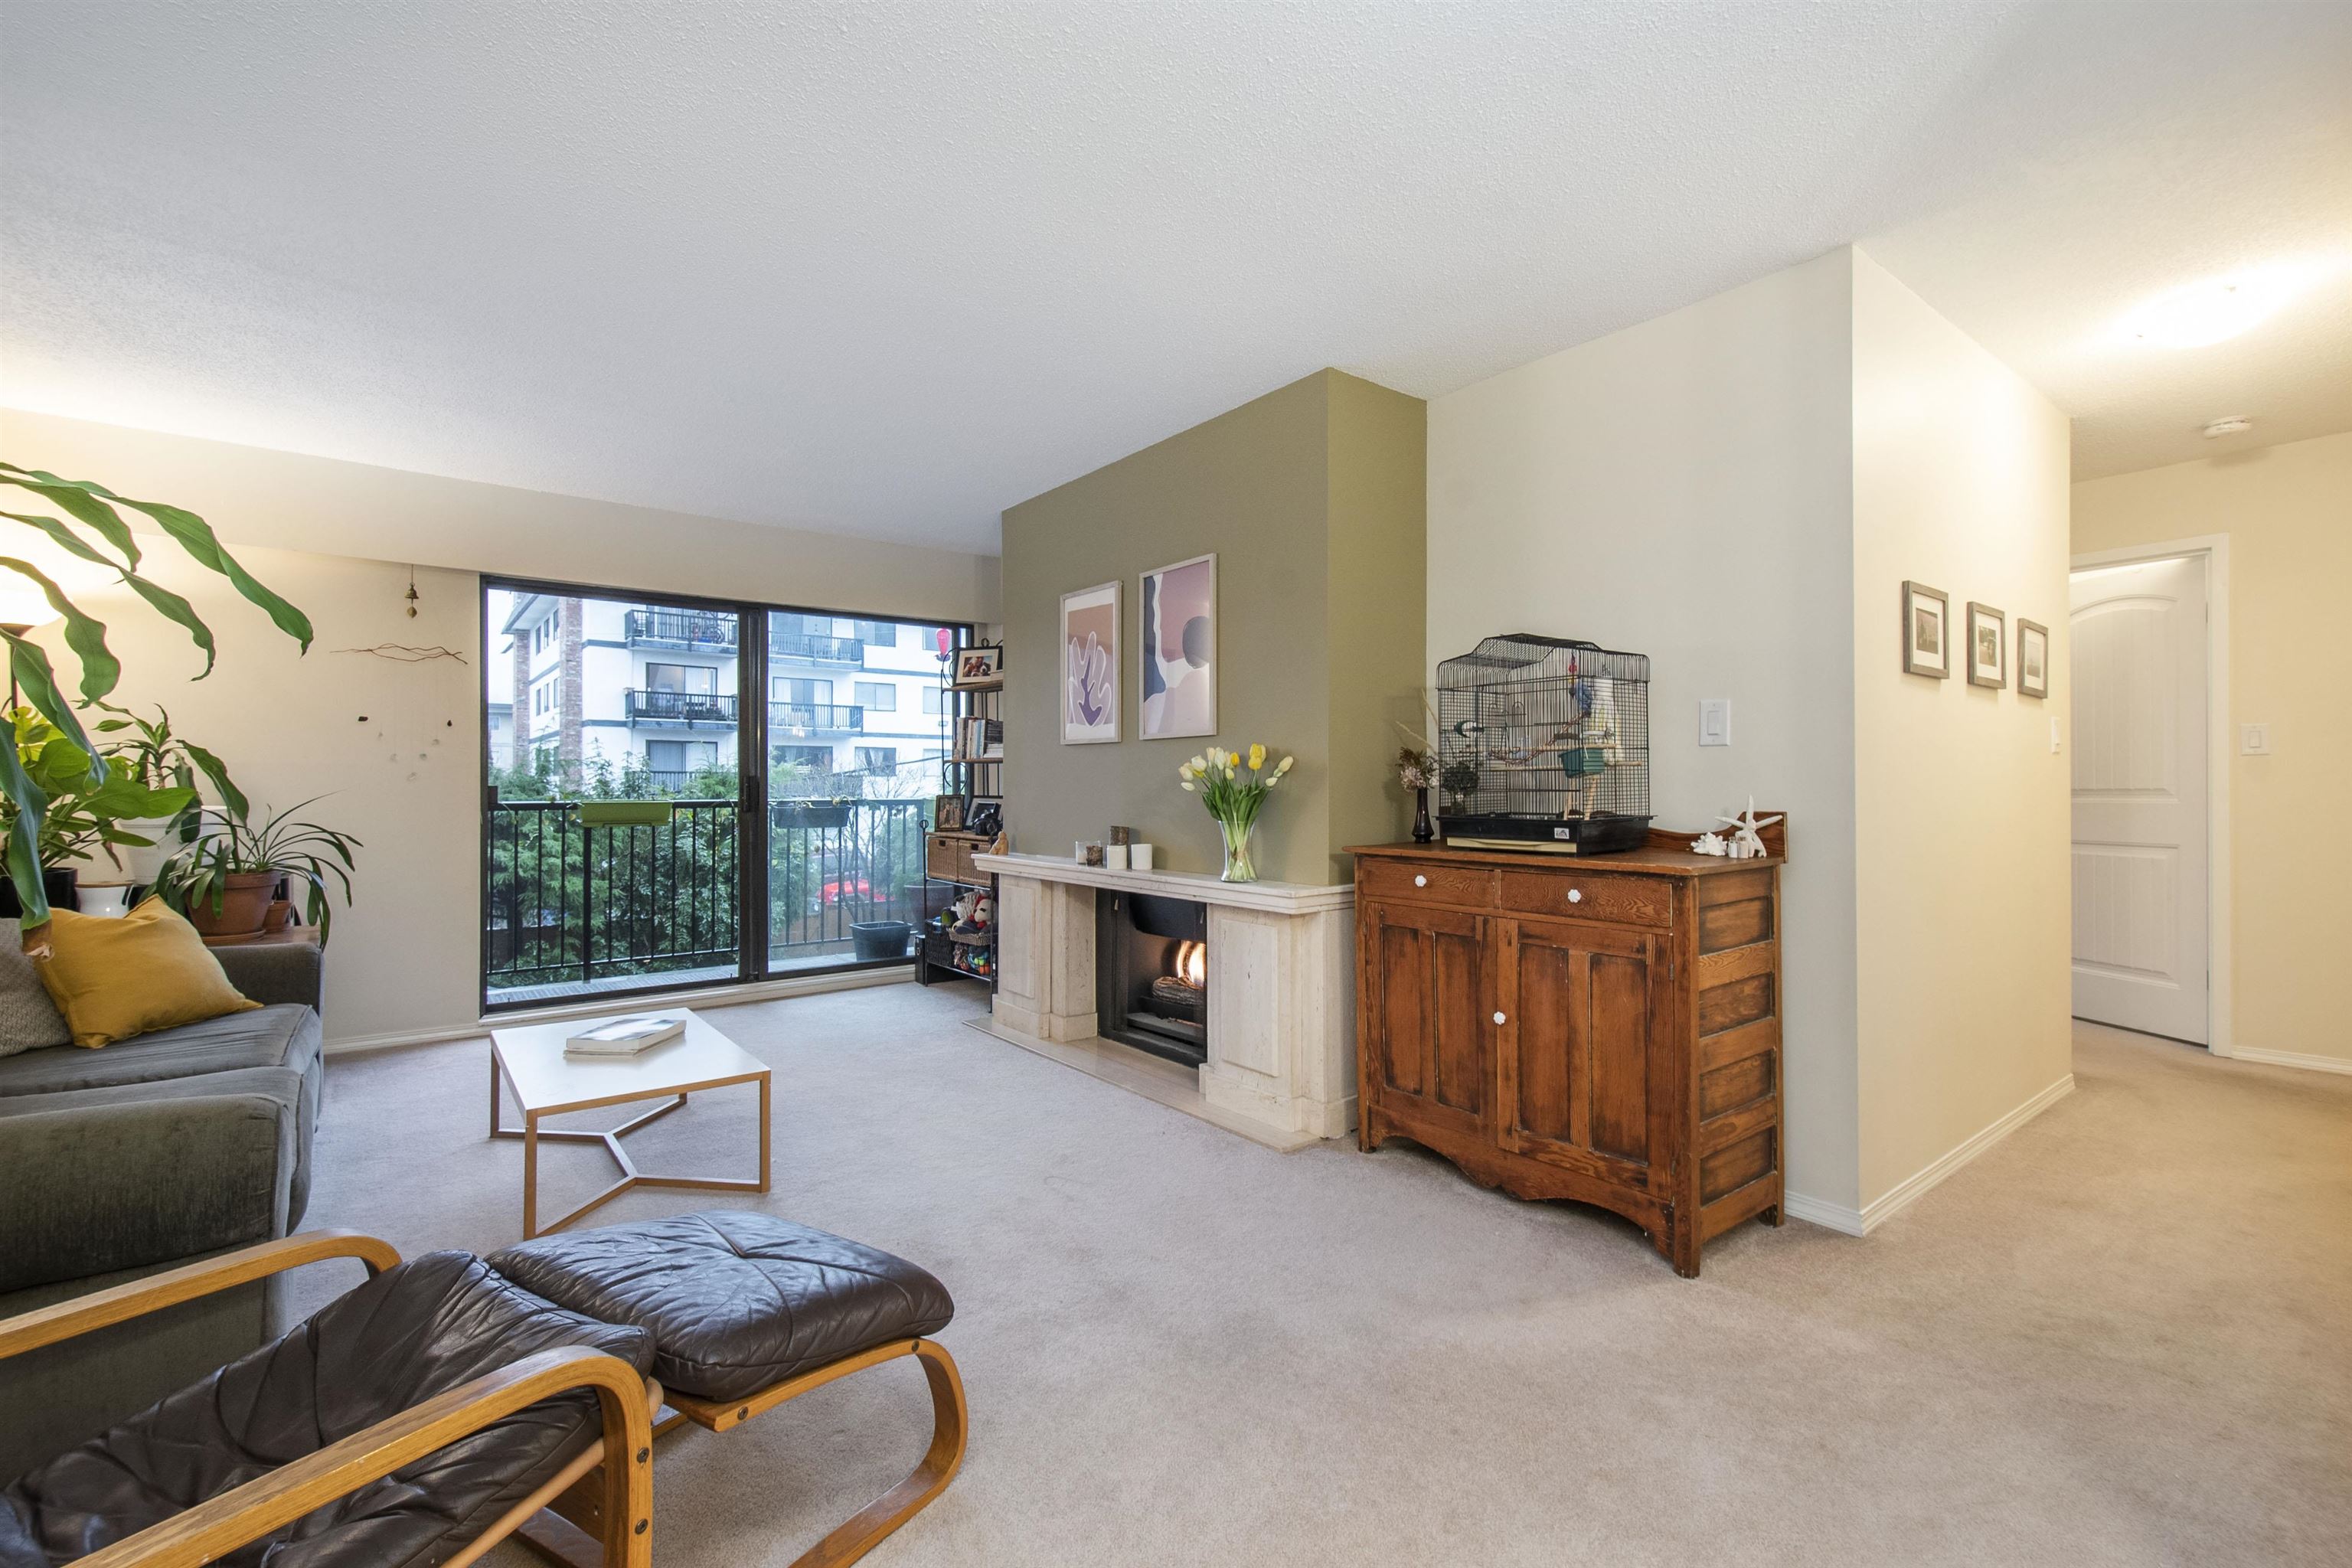 Central Lonsdale Apartment/Condo for sale:  2 bedroom 1,003 sq.ft. (Listed 6400-05-18)